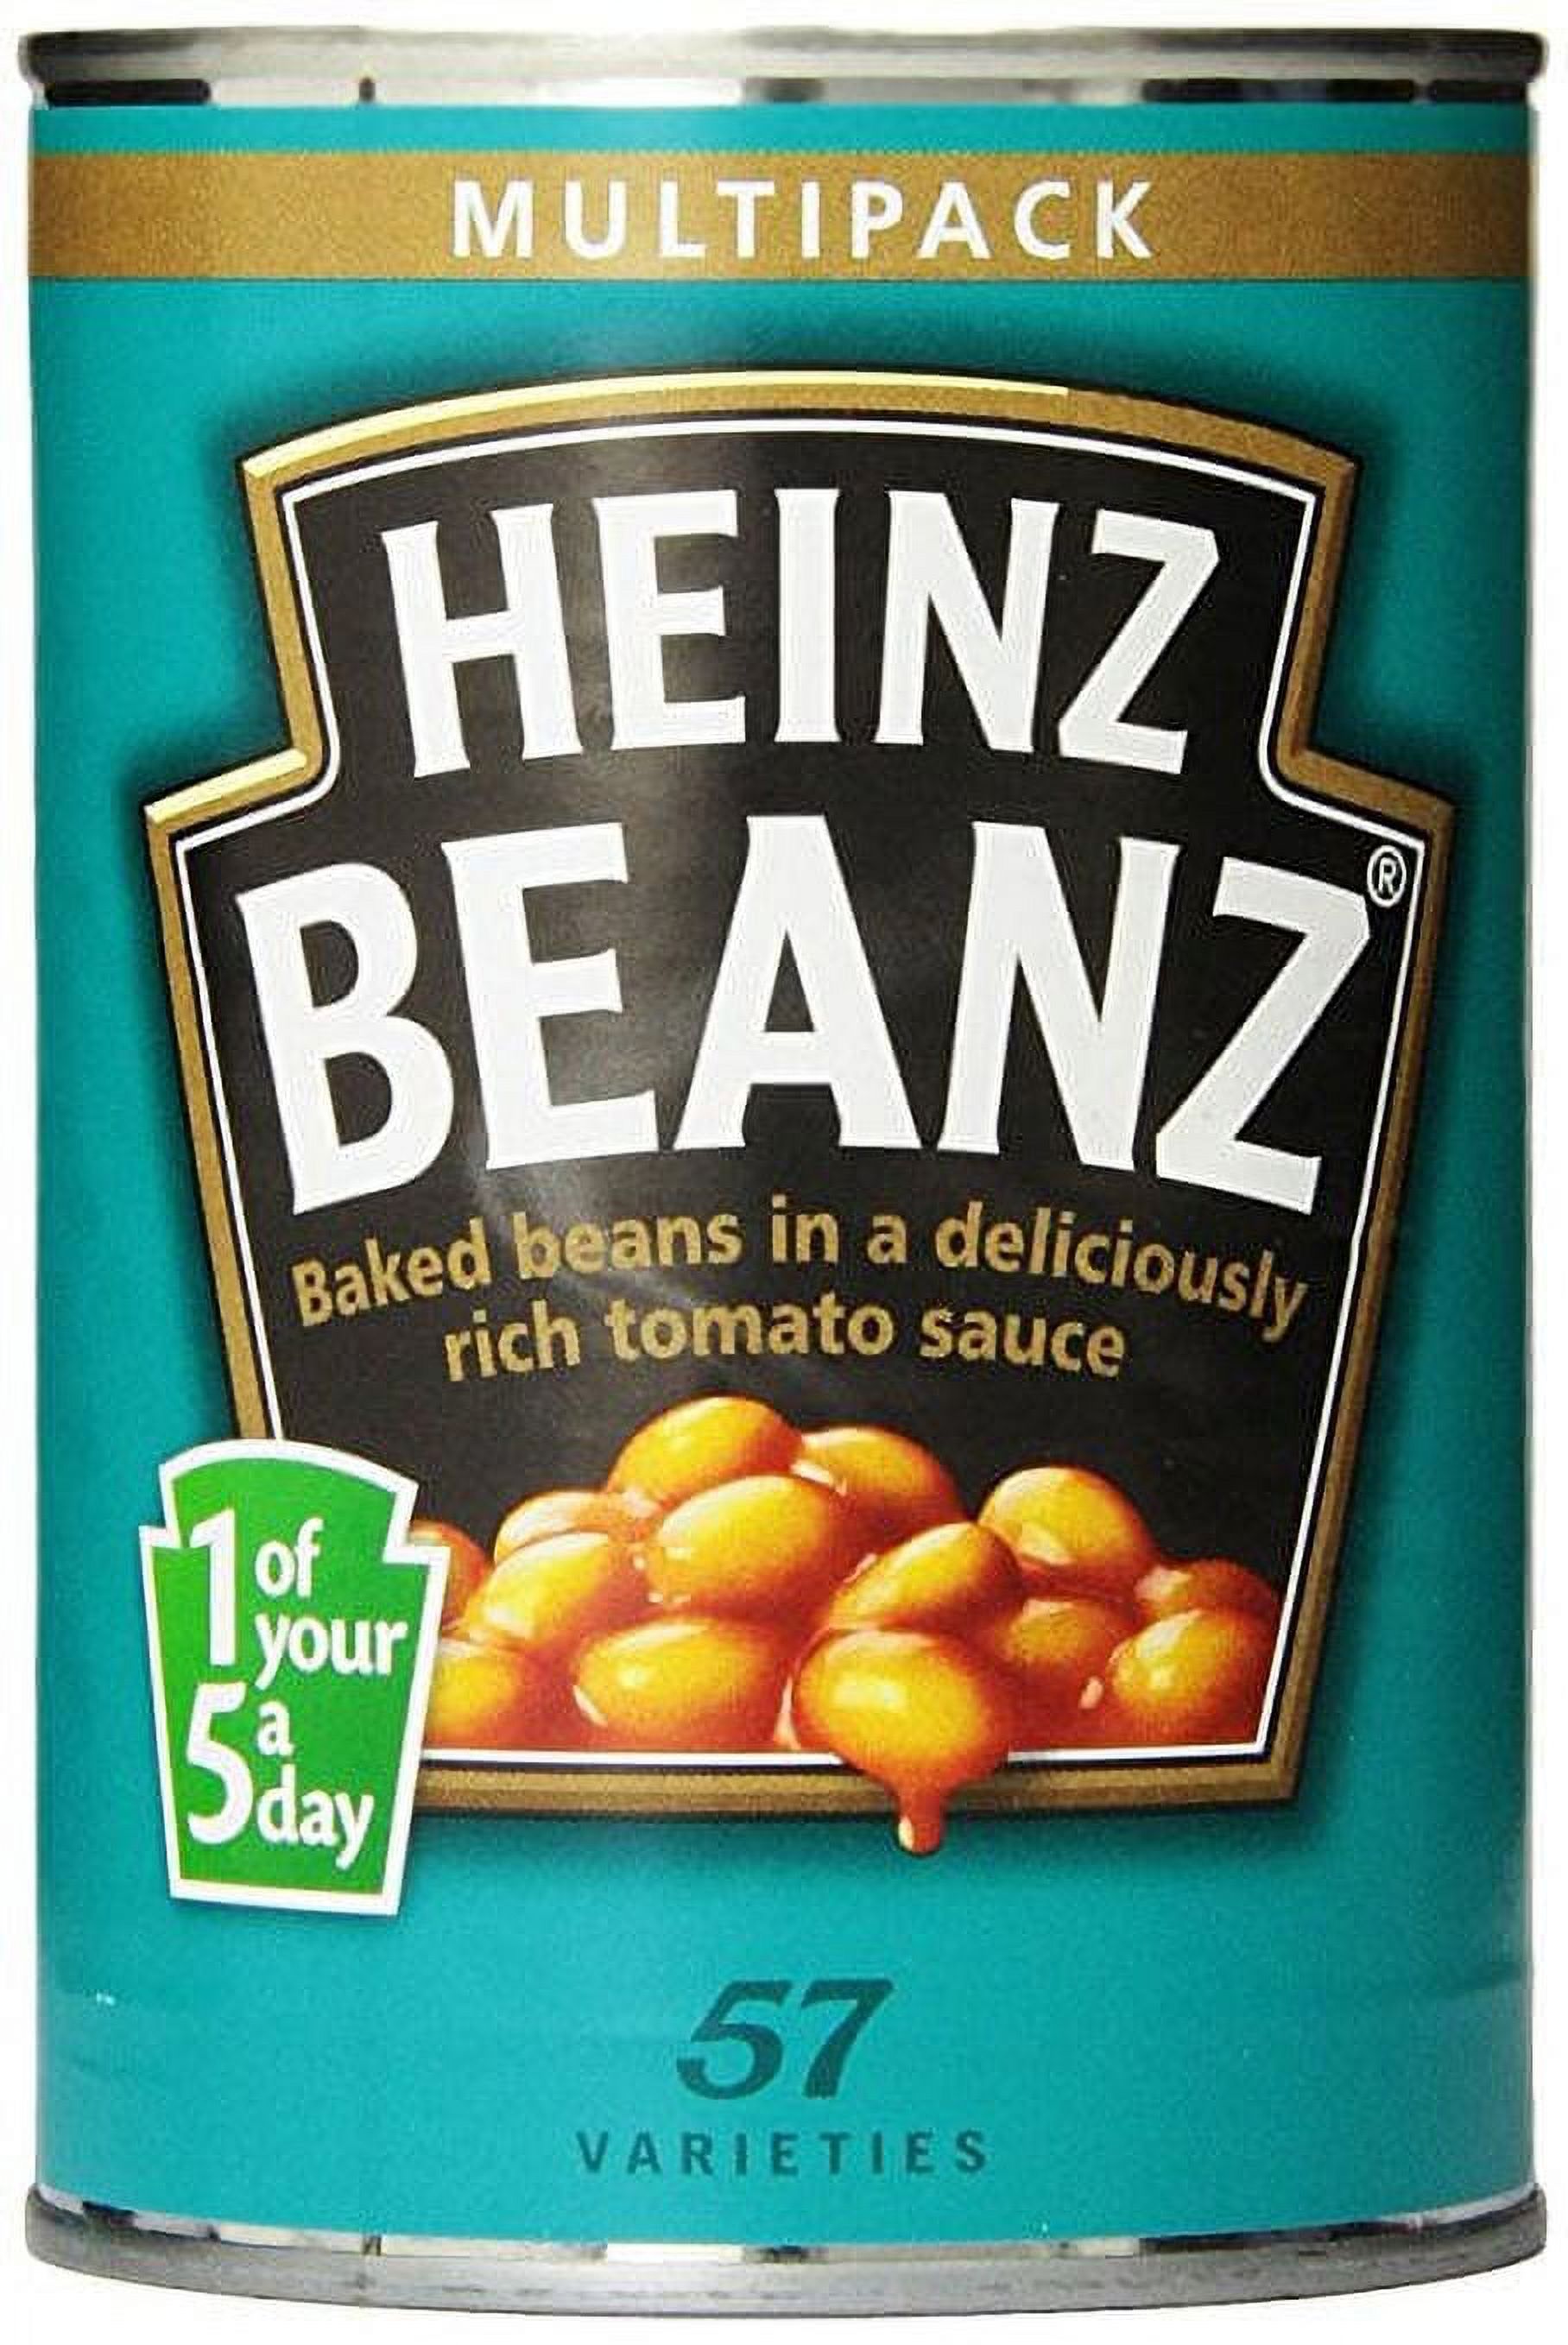 Heinz Baked Beans 415g 4 Pack (England) - image 1 of 7